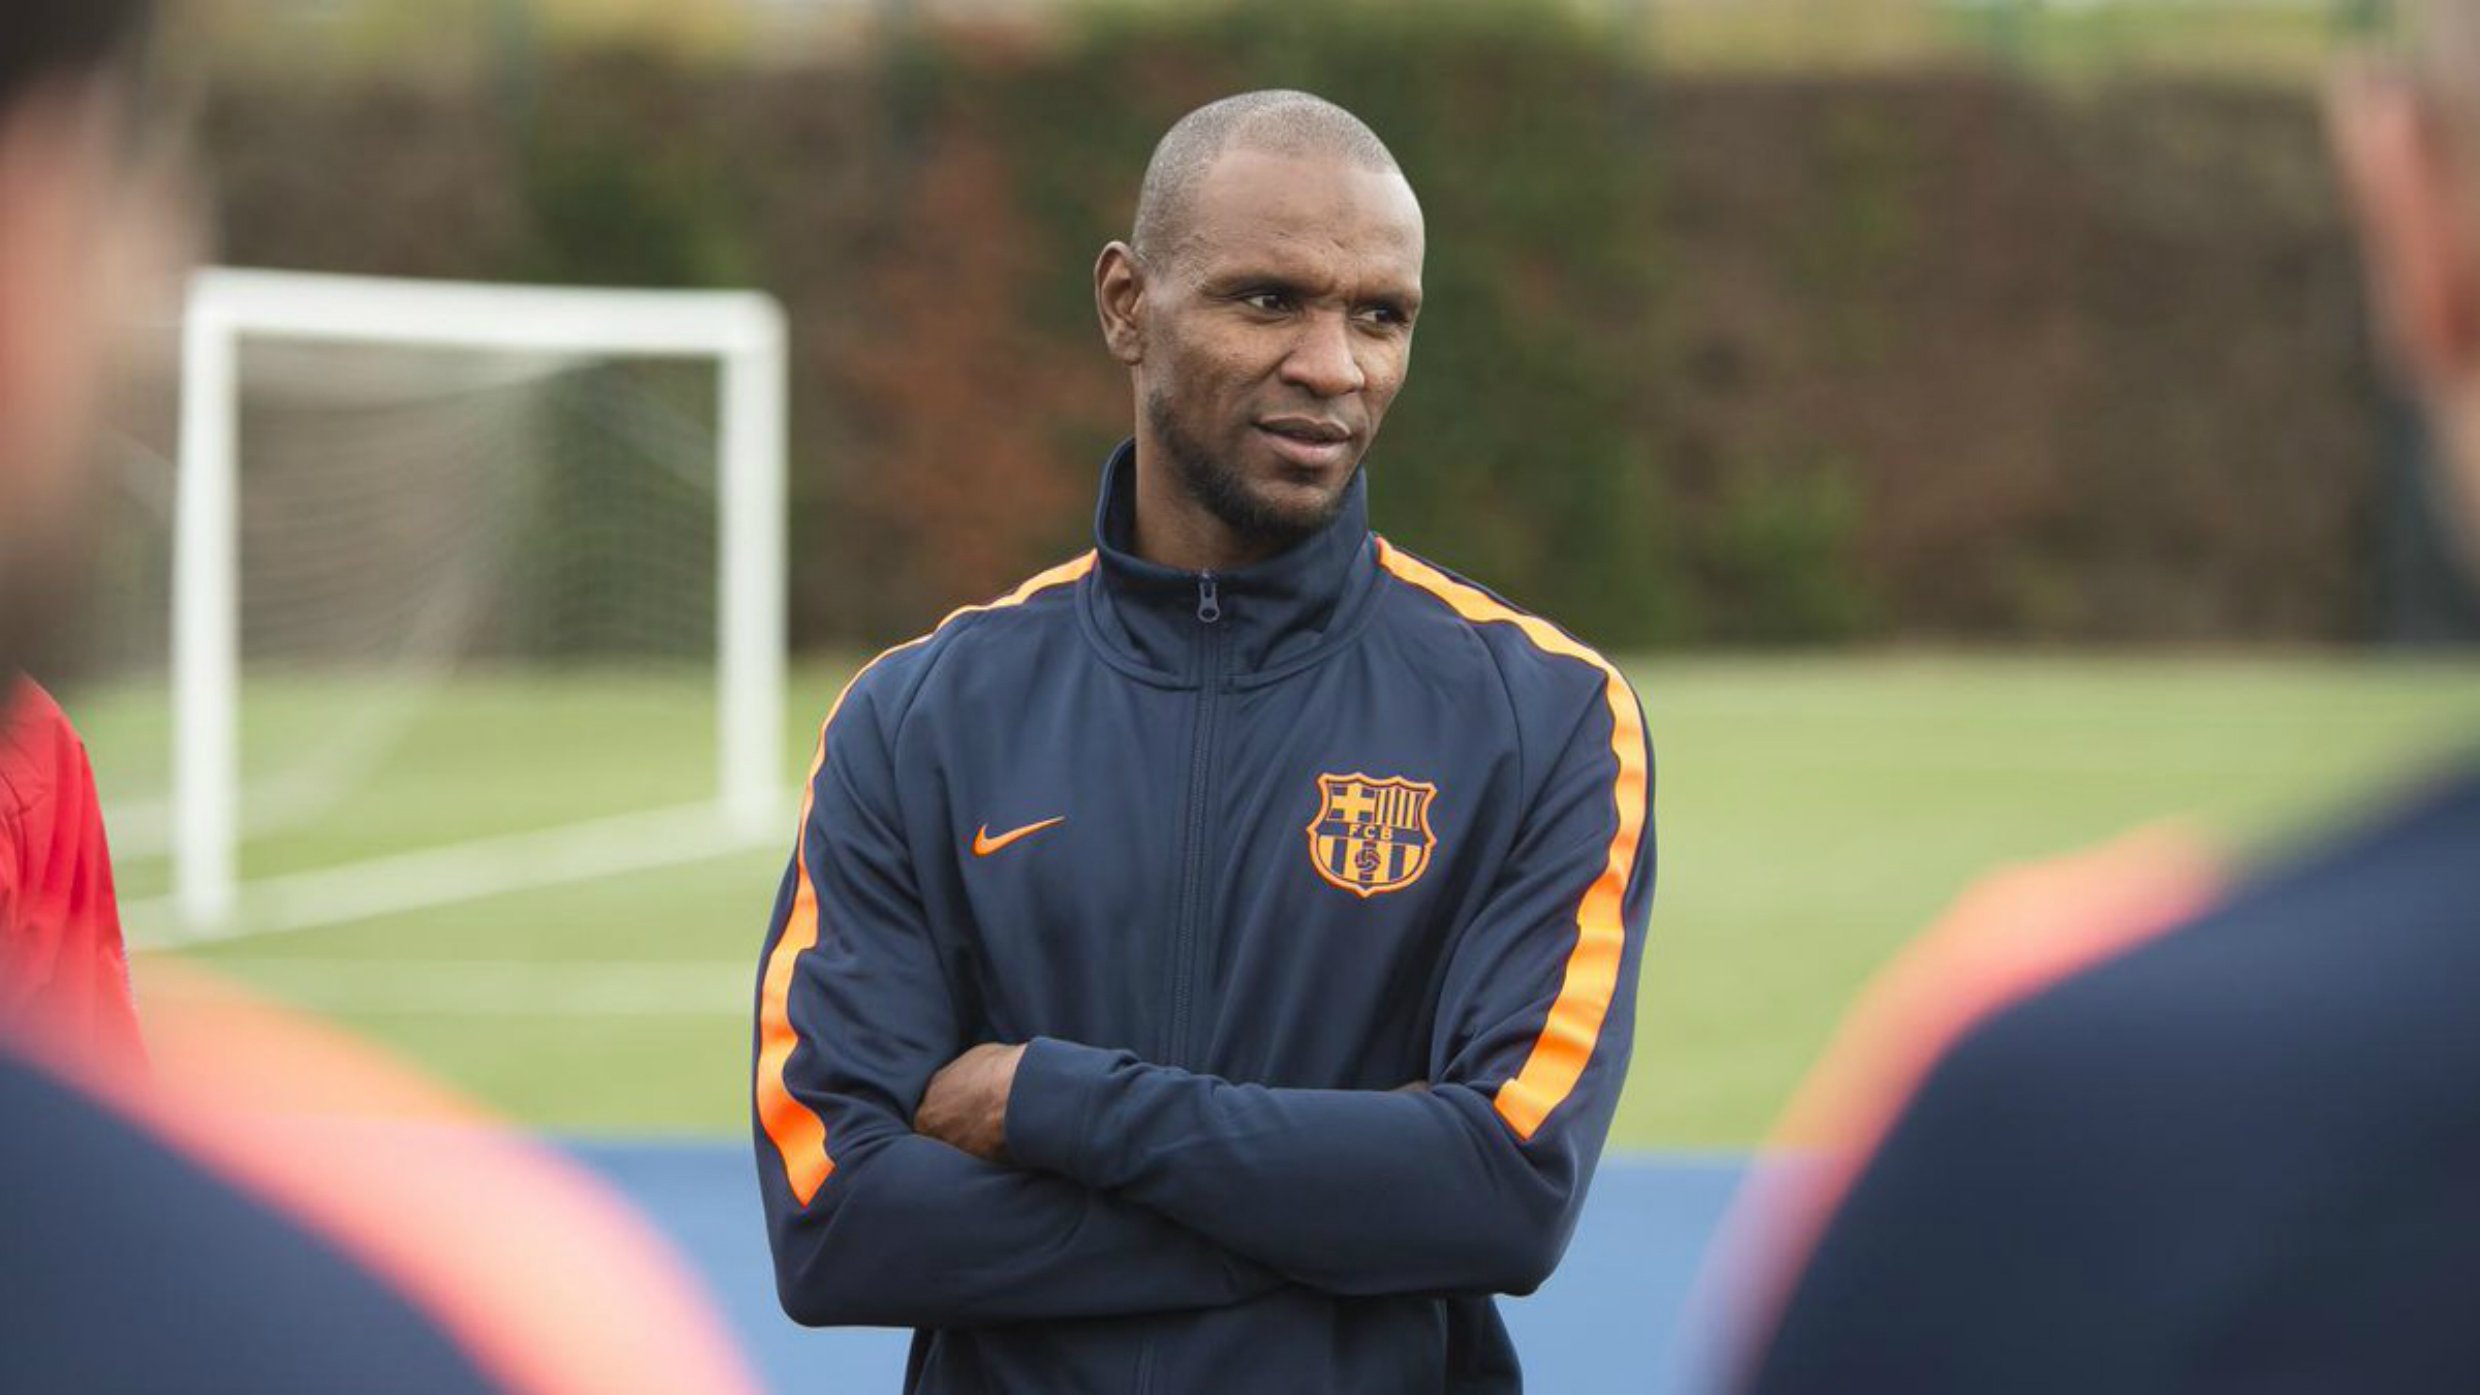 Ex-Barça player Éric Abidal confirms his transplanted liver was his cousin's